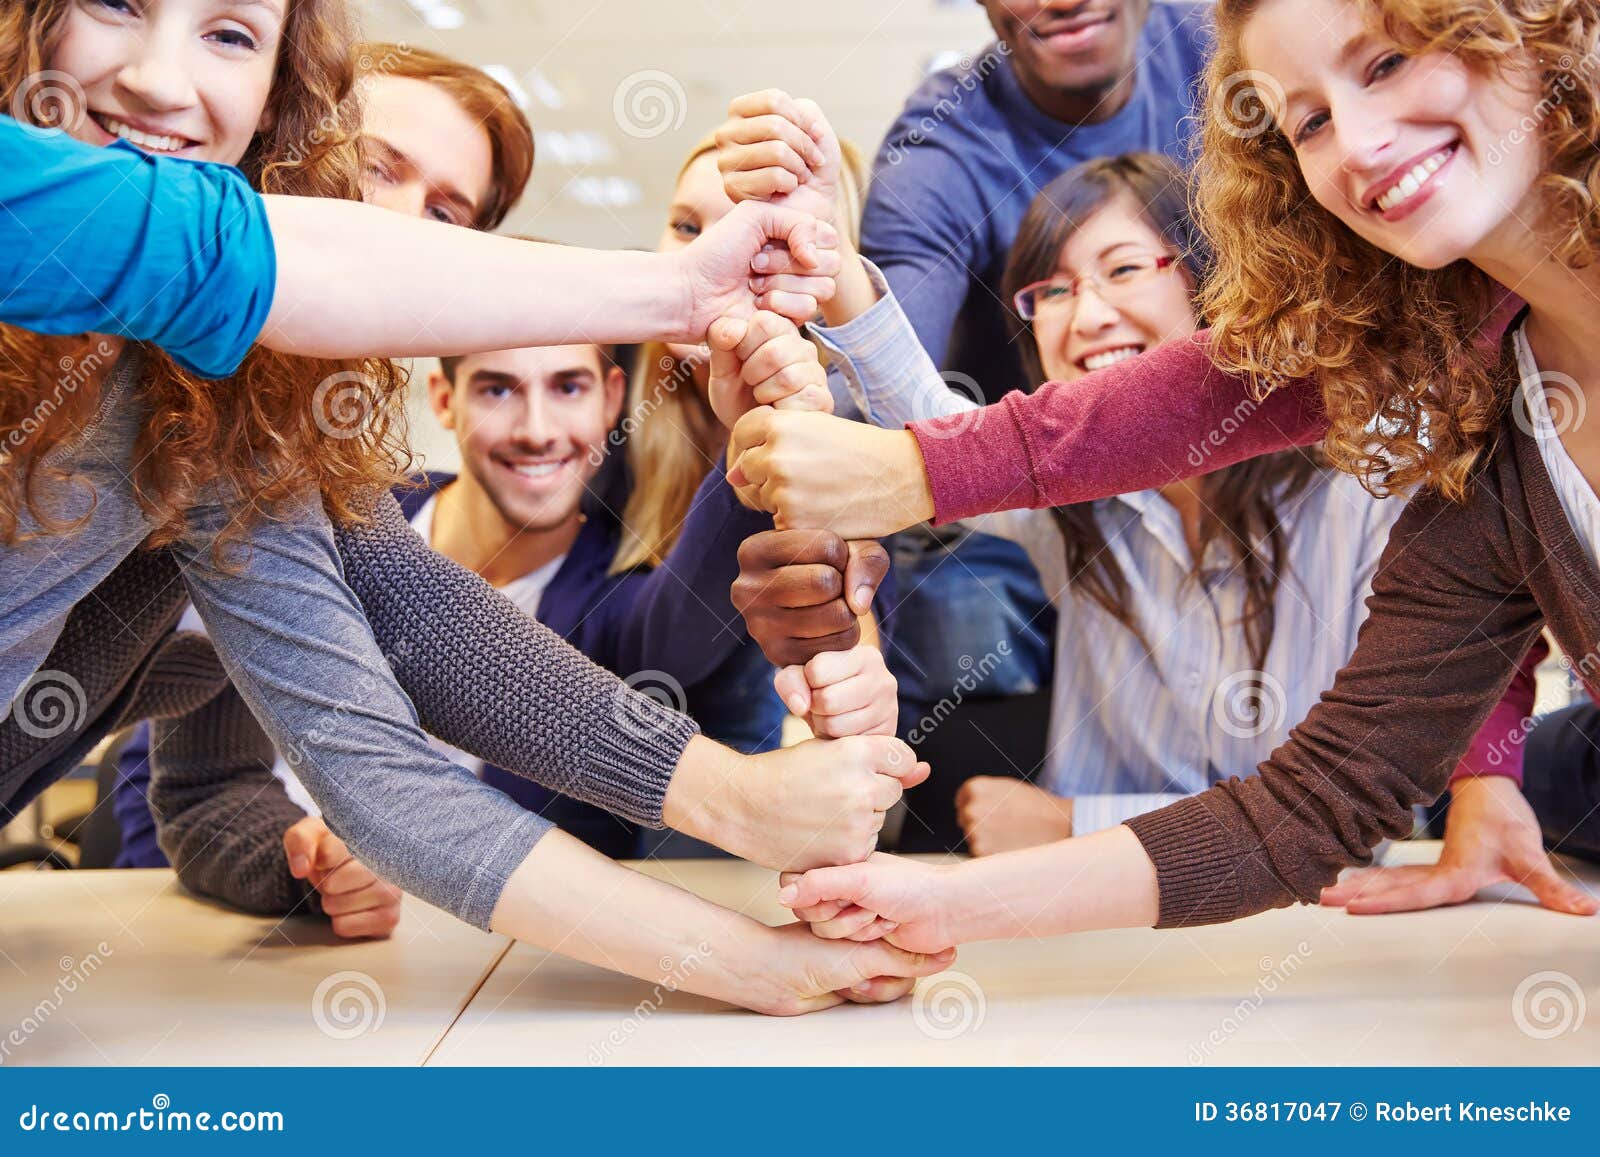 491 446 Cooperation Photos Free Royalty Free Stock Photos From Dreamstime